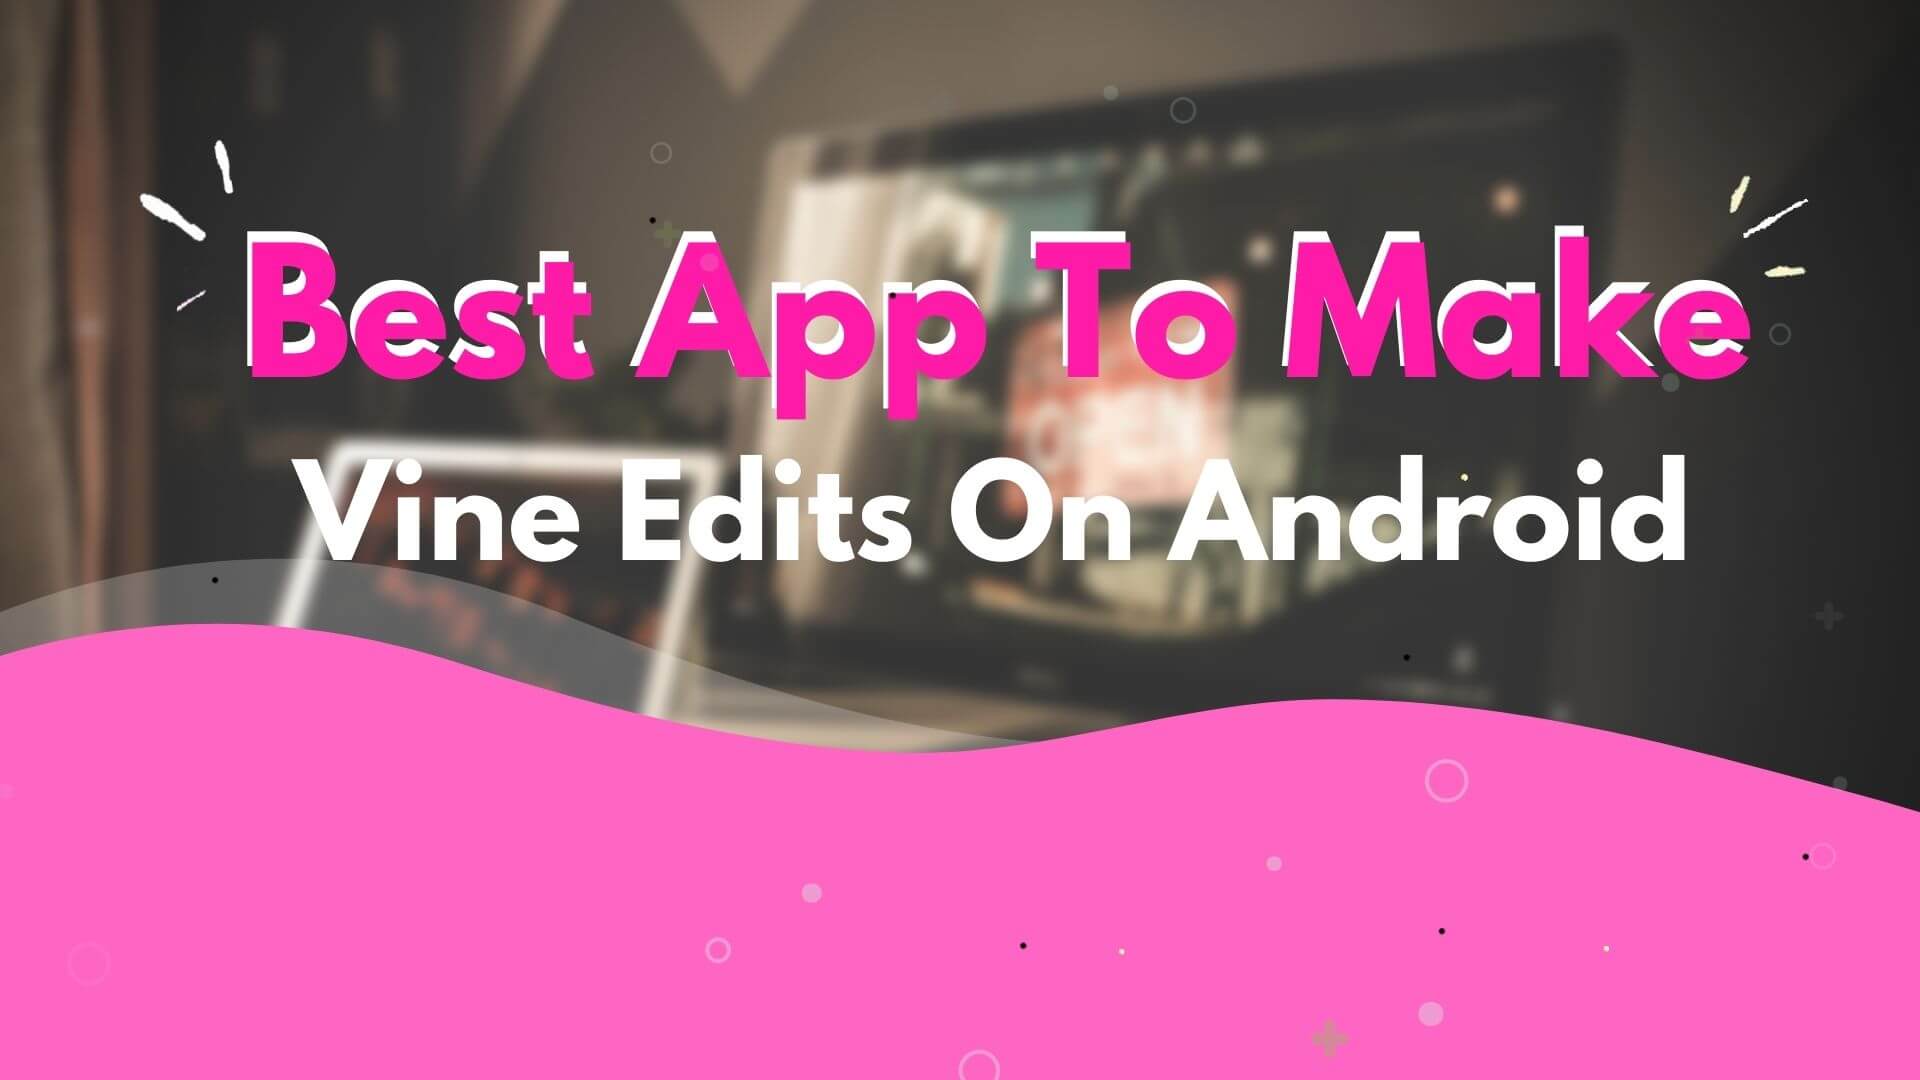 Best App To Make Vine Edits On Android 2021